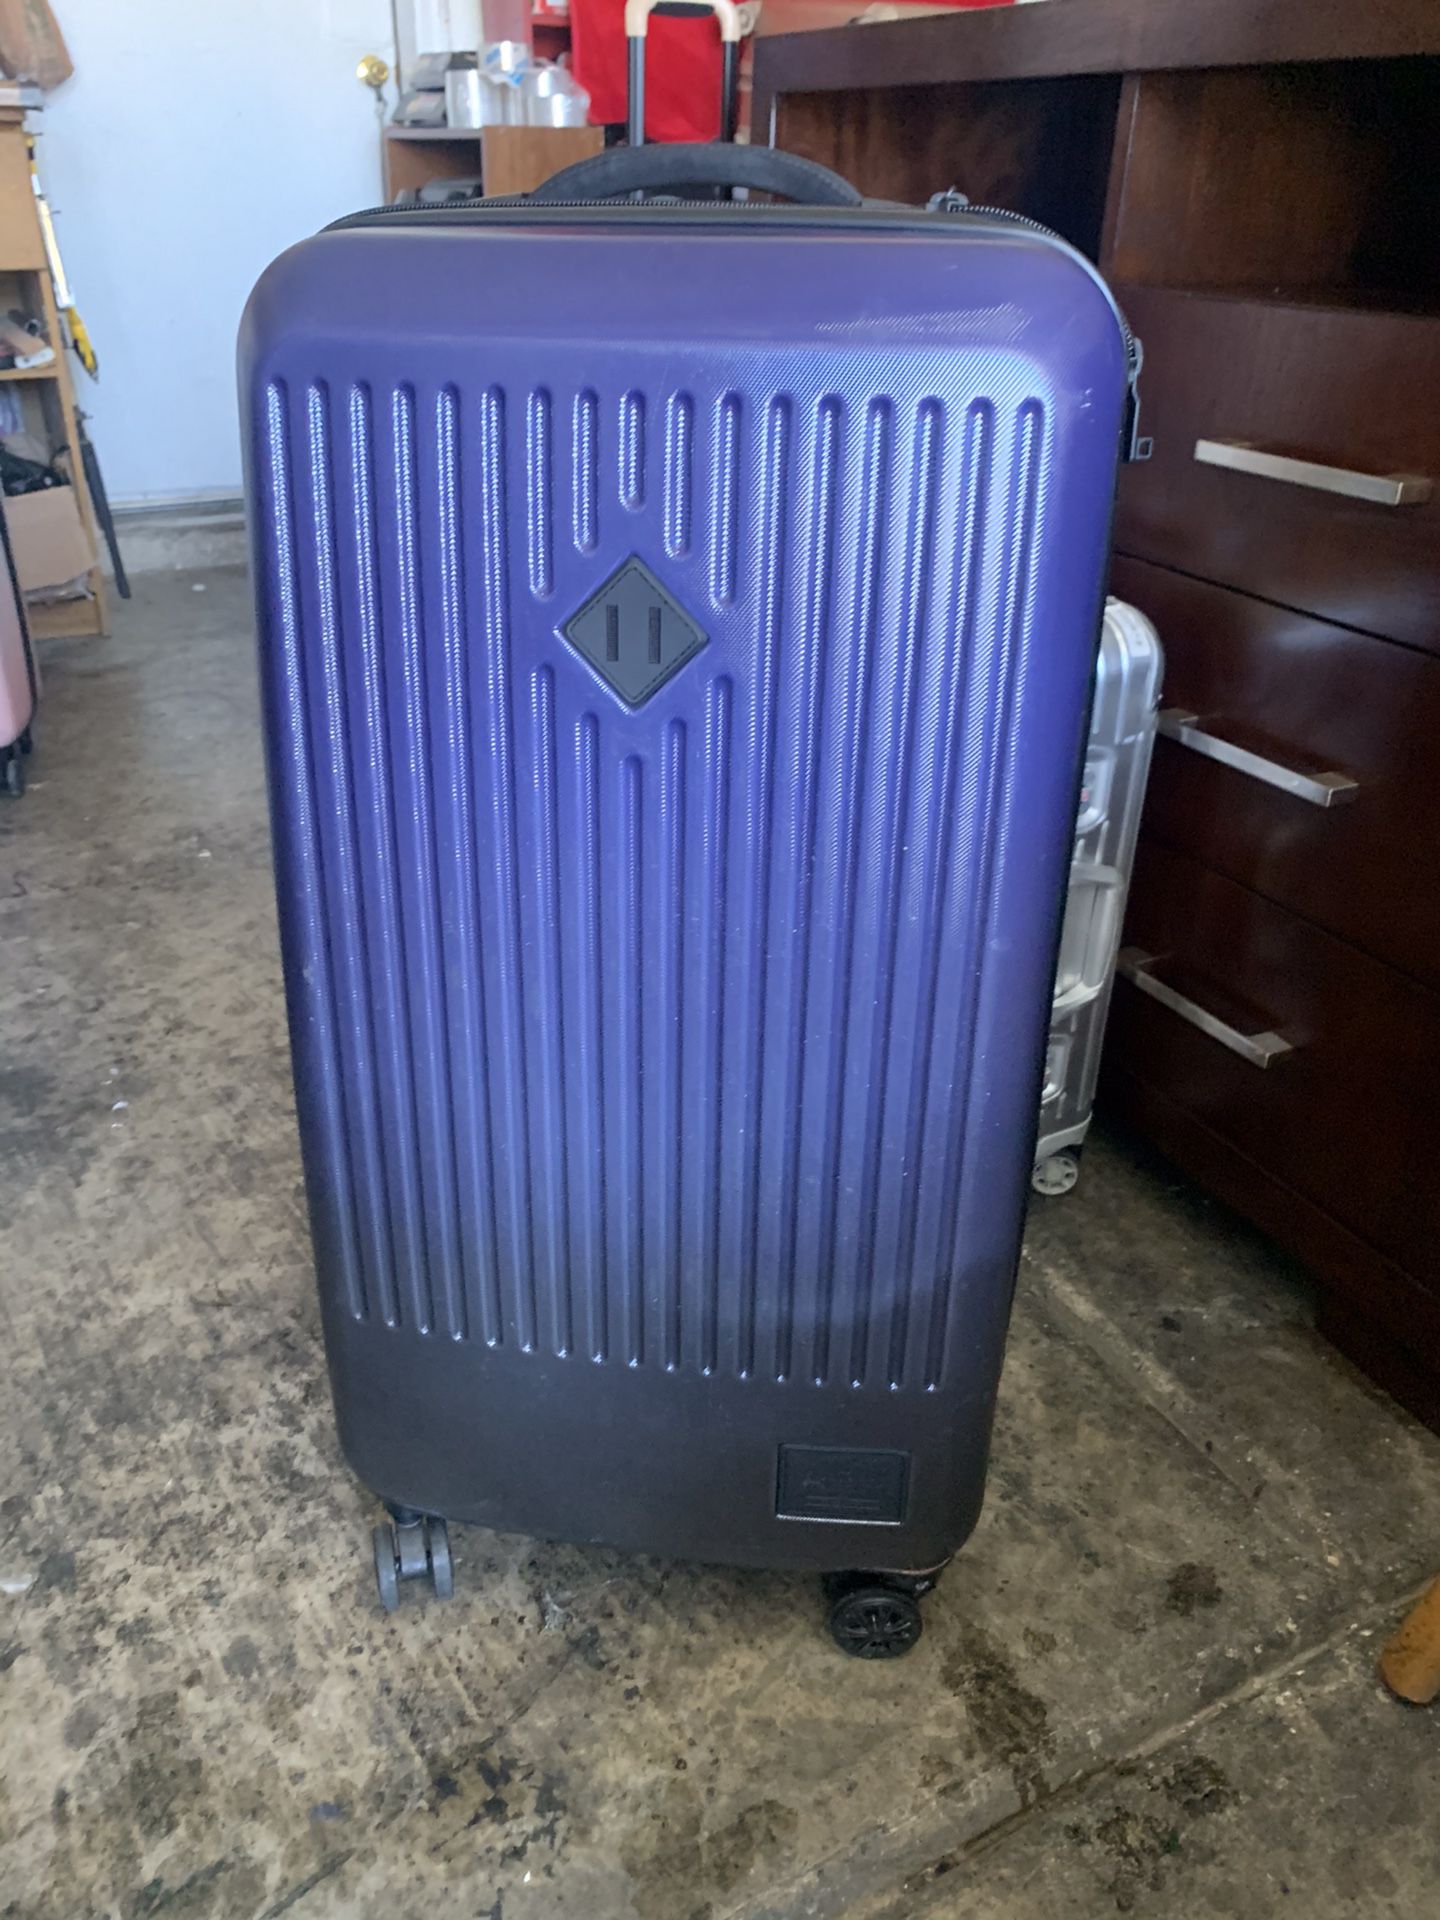 Herschel supply co trade large 33” 2 tone blue and black hard shell suitcase 4 wheel spinner / wheels zippers handles great shape